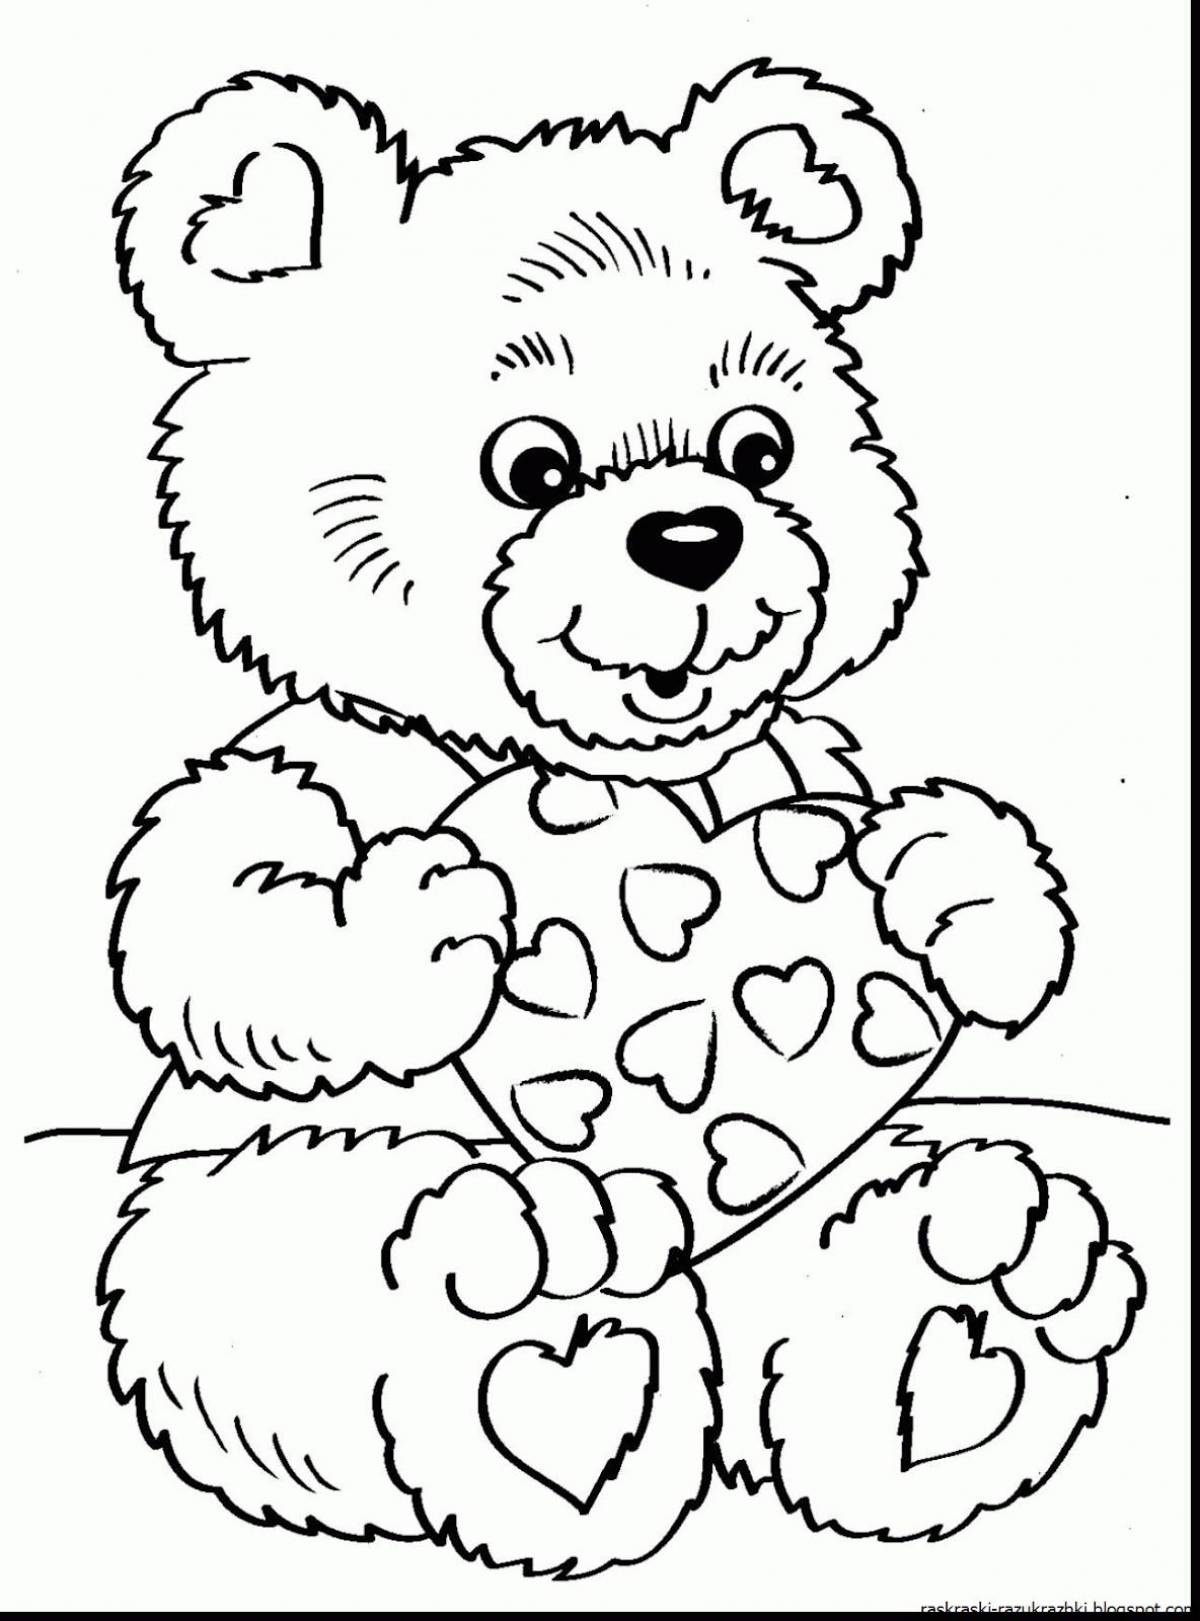 Furry teddy bear with heart coloring book